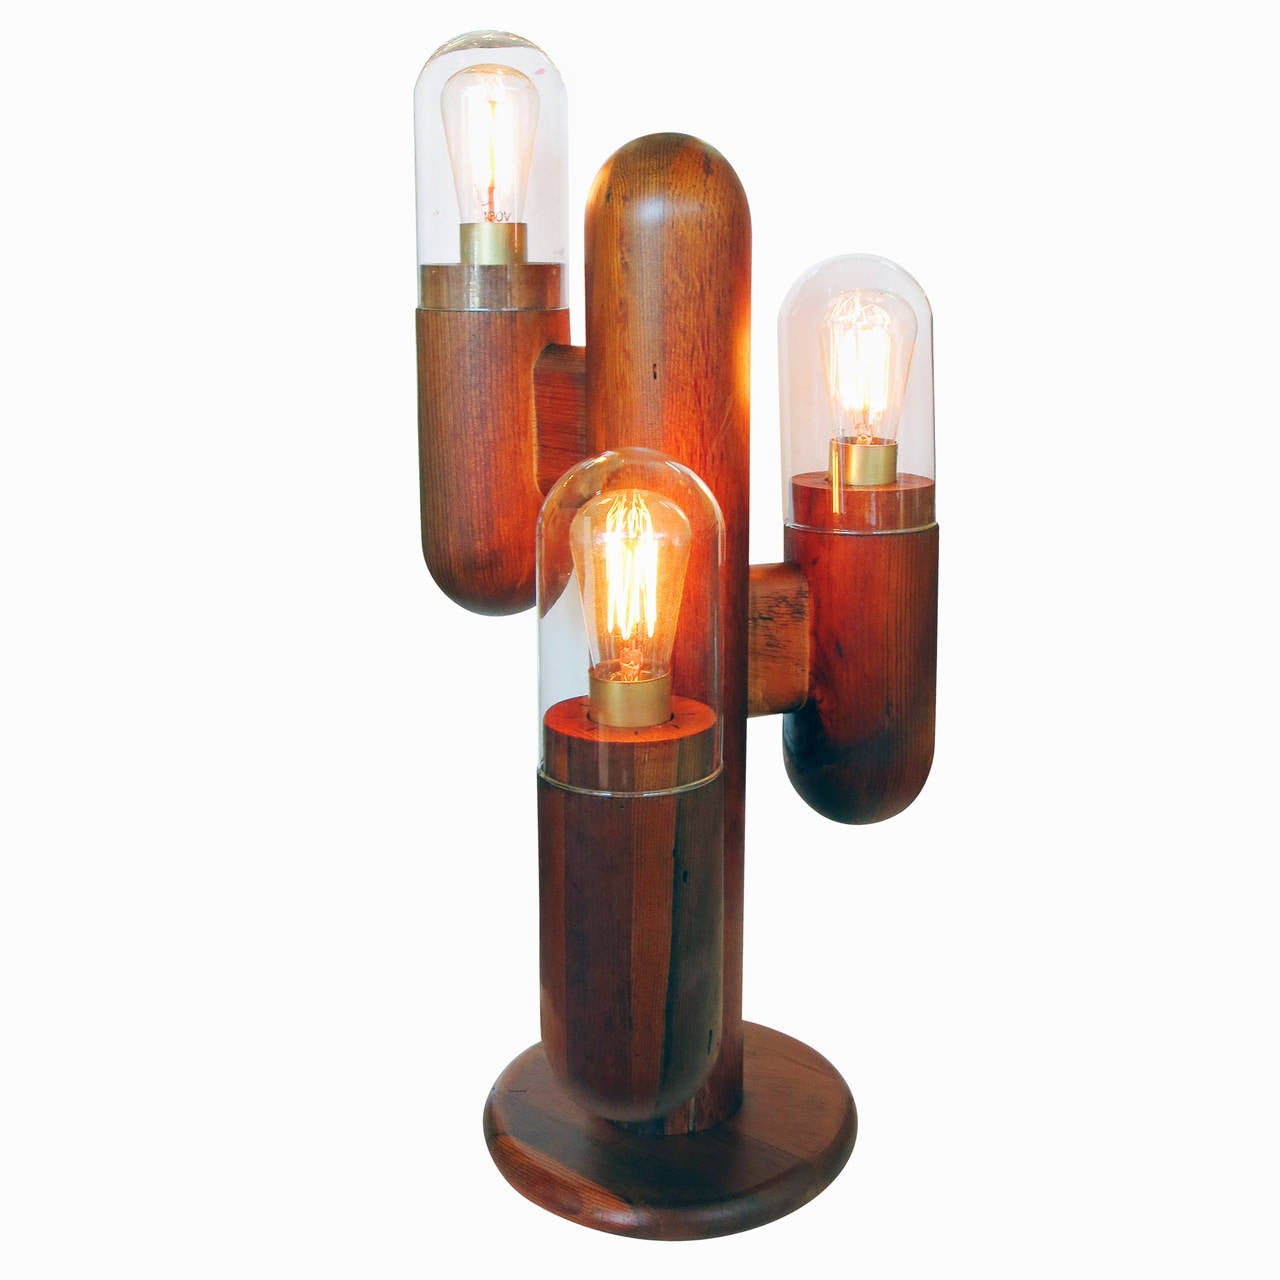 Dear Customer, I have marked many of my items for the 1stdibs Saturday Sale, take a look and save from 20% to 50% now. Take a look at all of these items; https://goo.gl/hNLz4x

Whimsical and rustic cactus table lamps made of solid wood with original